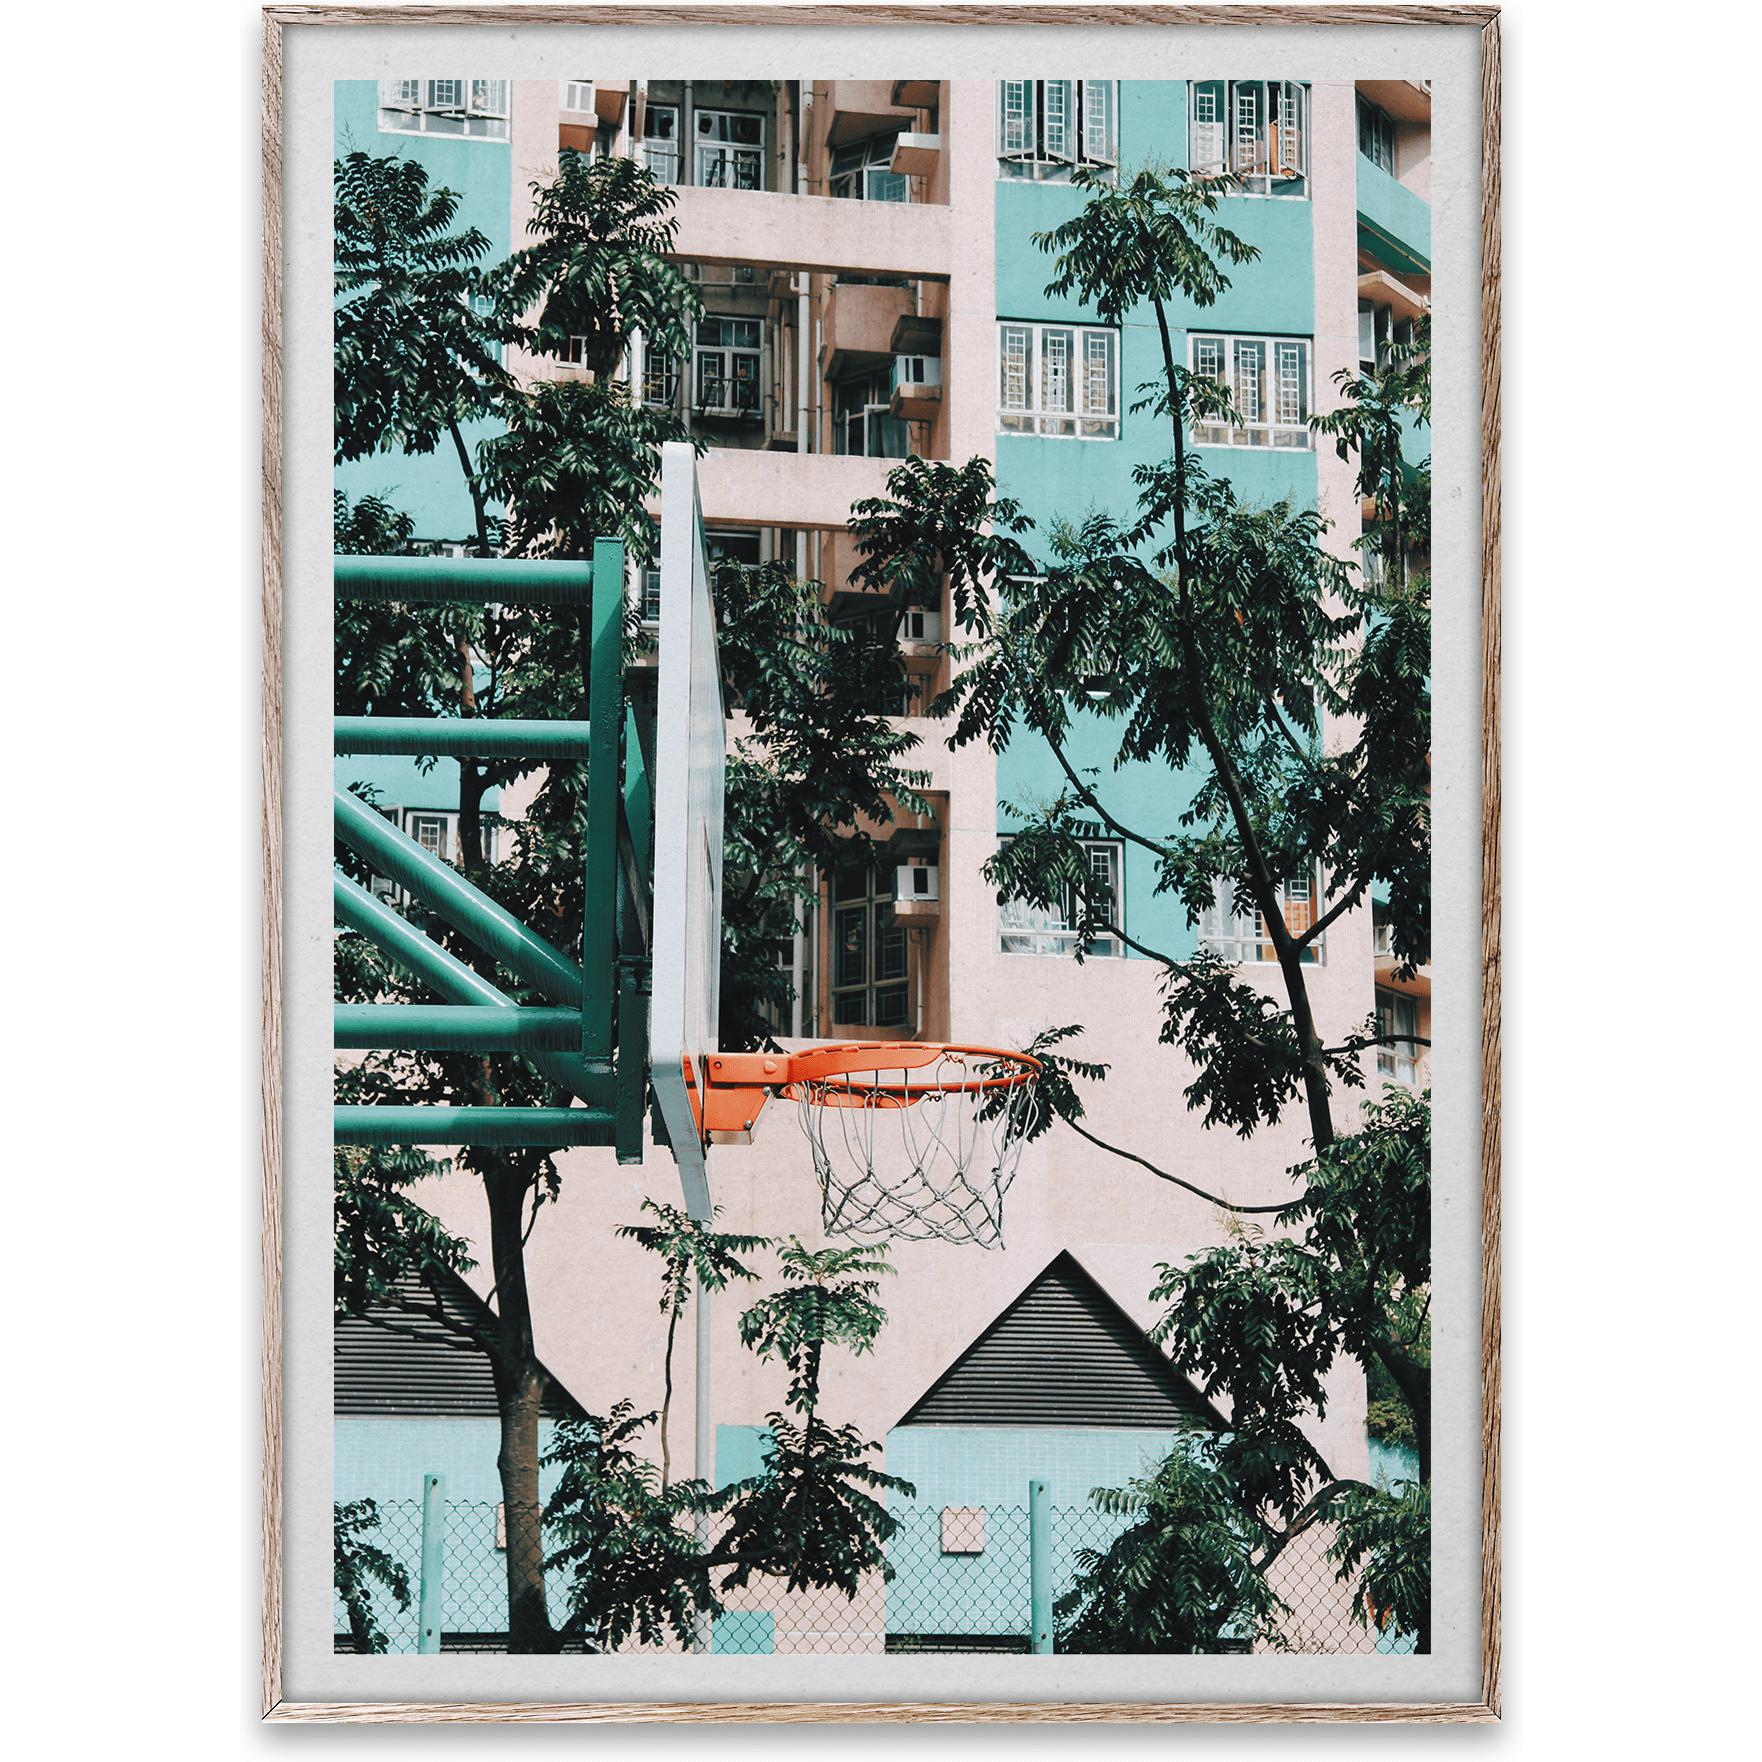 Paper Collective Cities Of Basketball 01, Hong Kong Poster, 50x70 Cm